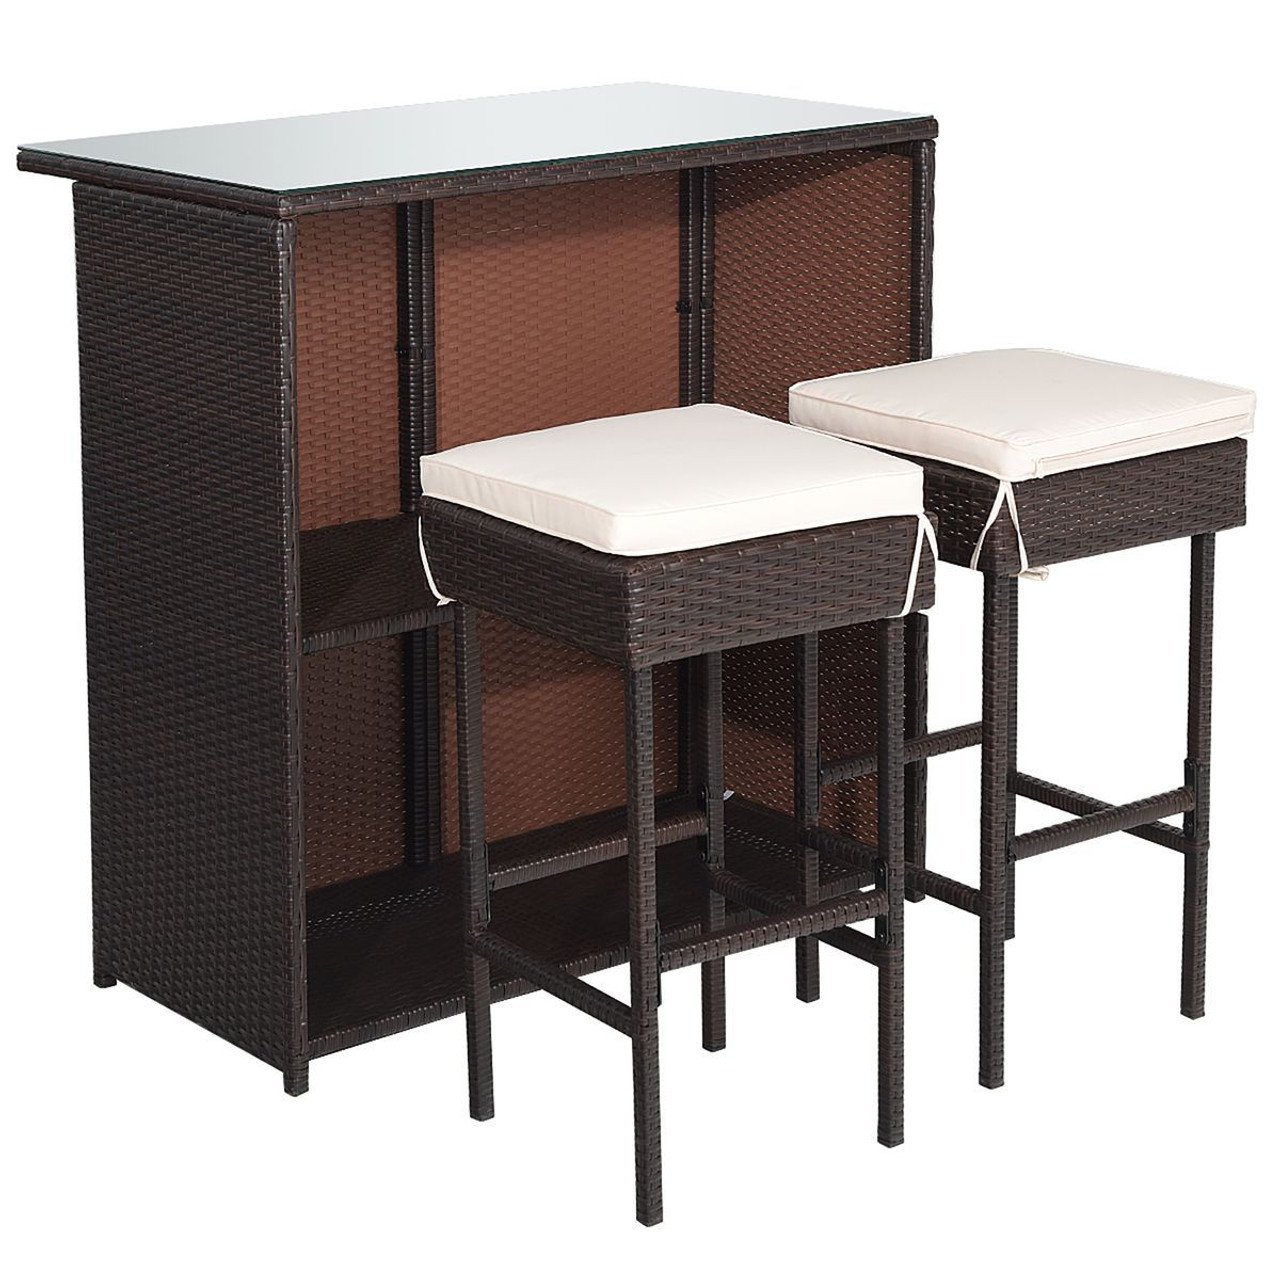 Costway 3-Piece Patio Rattan Wicker Bar Dining Set product image